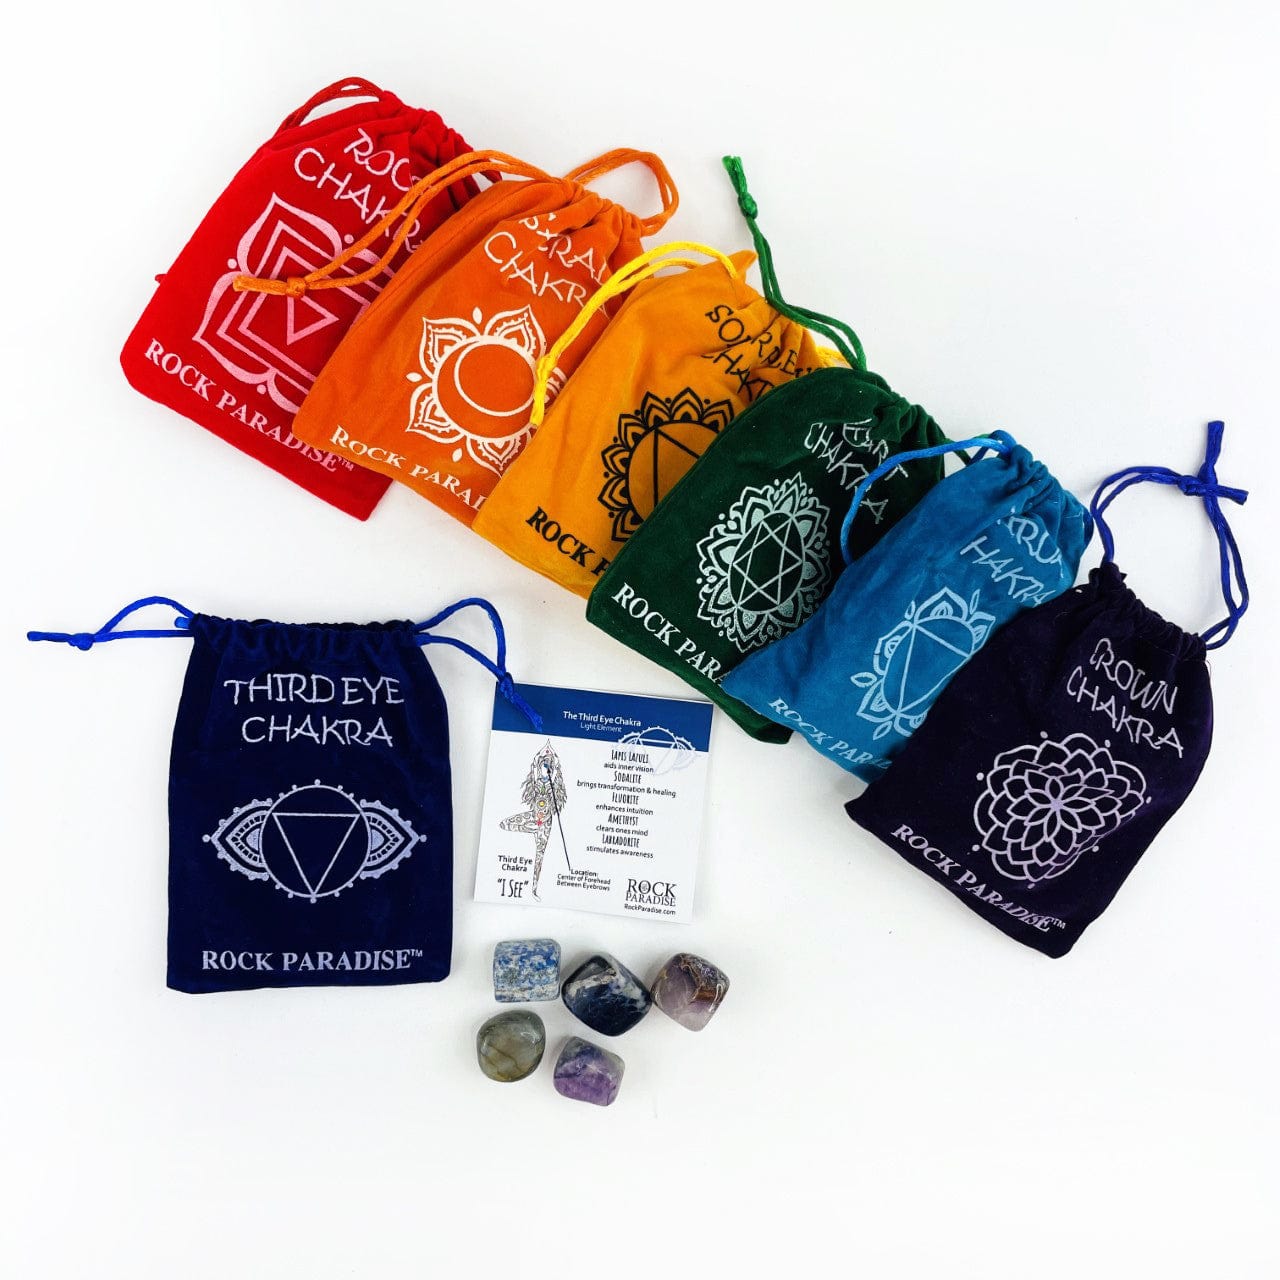 Third Eye Pouch opened with the information card and tumbled stones beside it, and the other sets behind